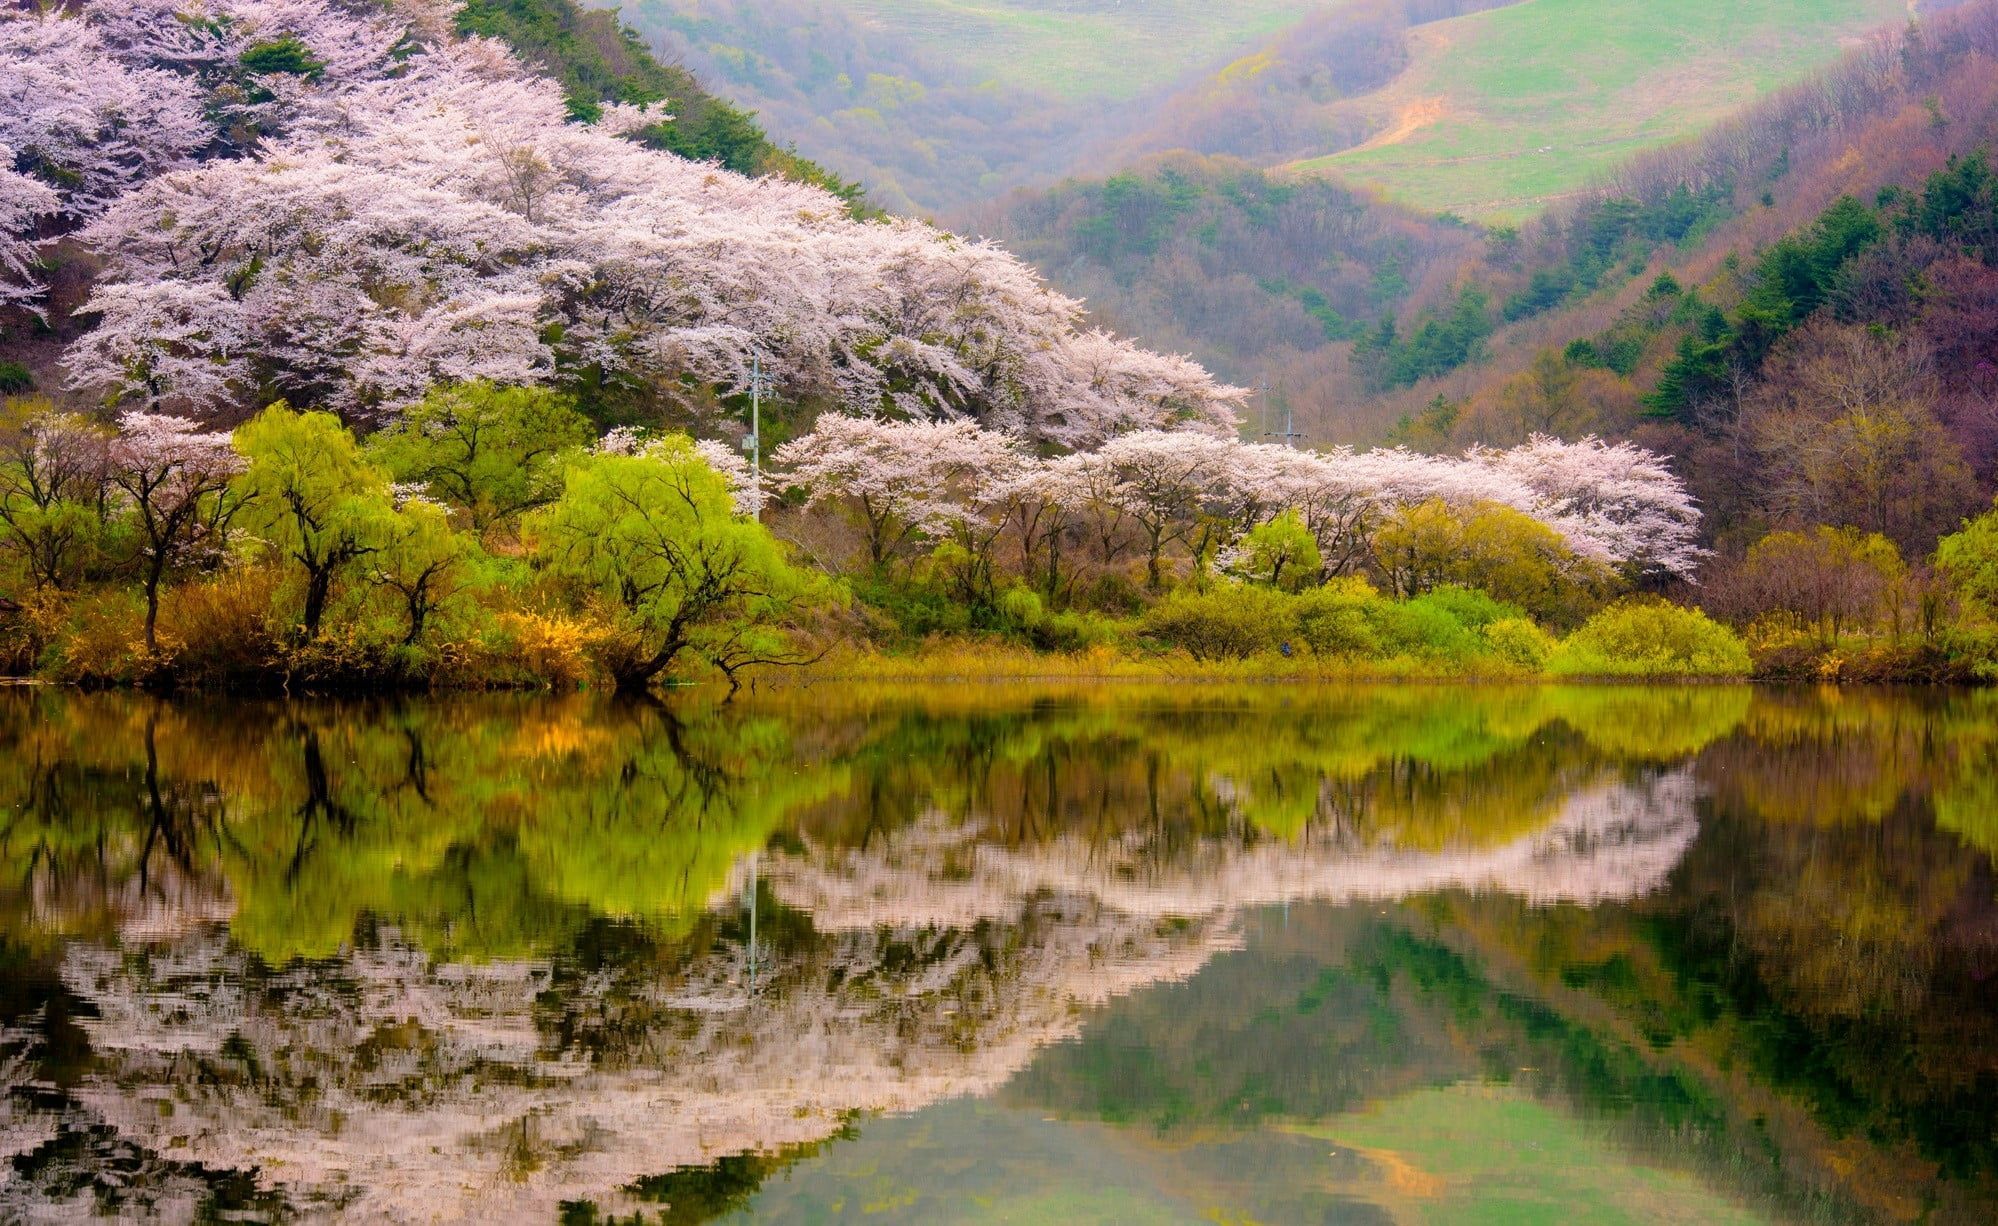 Green Leafed Trees #spring #forest #mountains #lake #reflection #blossoms #trees #nature #landscape. Spring Desktop Wallpaper, Nature Wallpaper, Spring Wallpaper